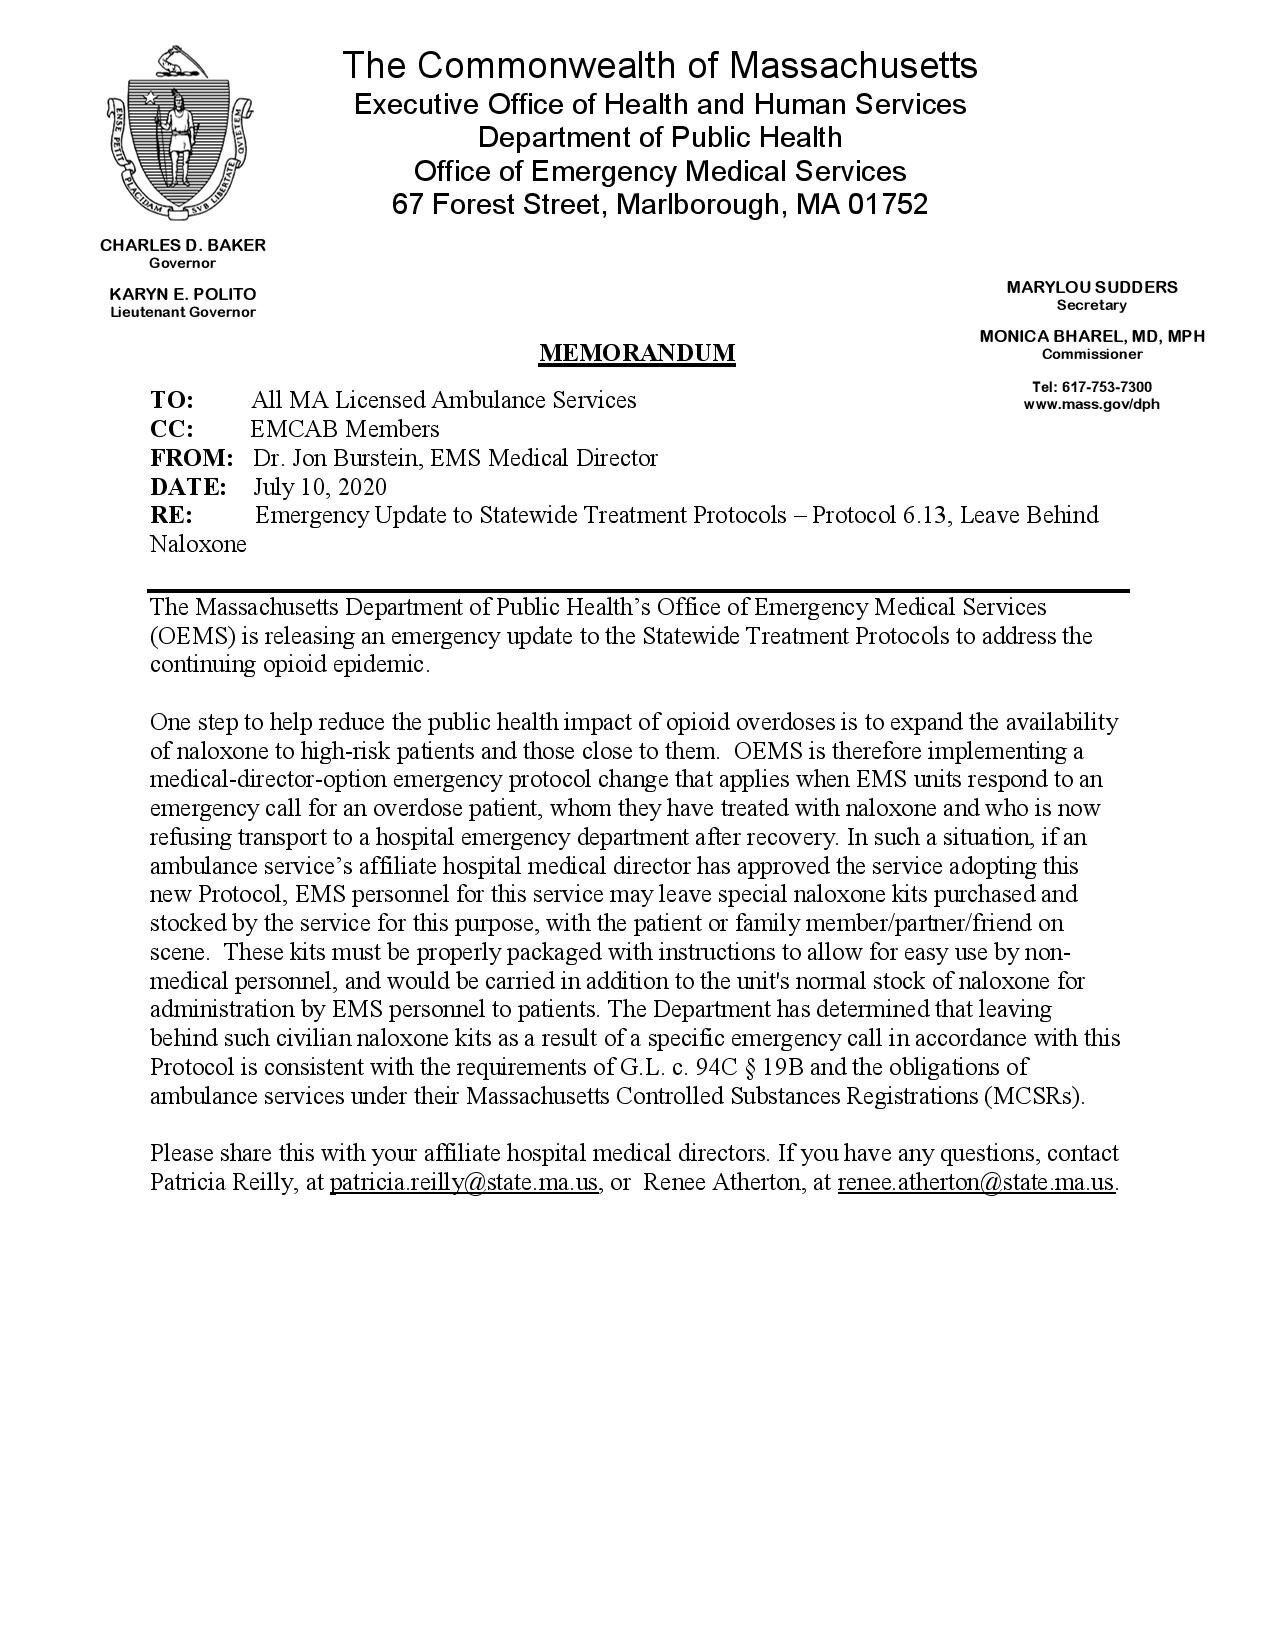 Memorandum for Emergency Update to Statewide Treatment Protocols for Leave Behind Naloxone-page-001.jpg